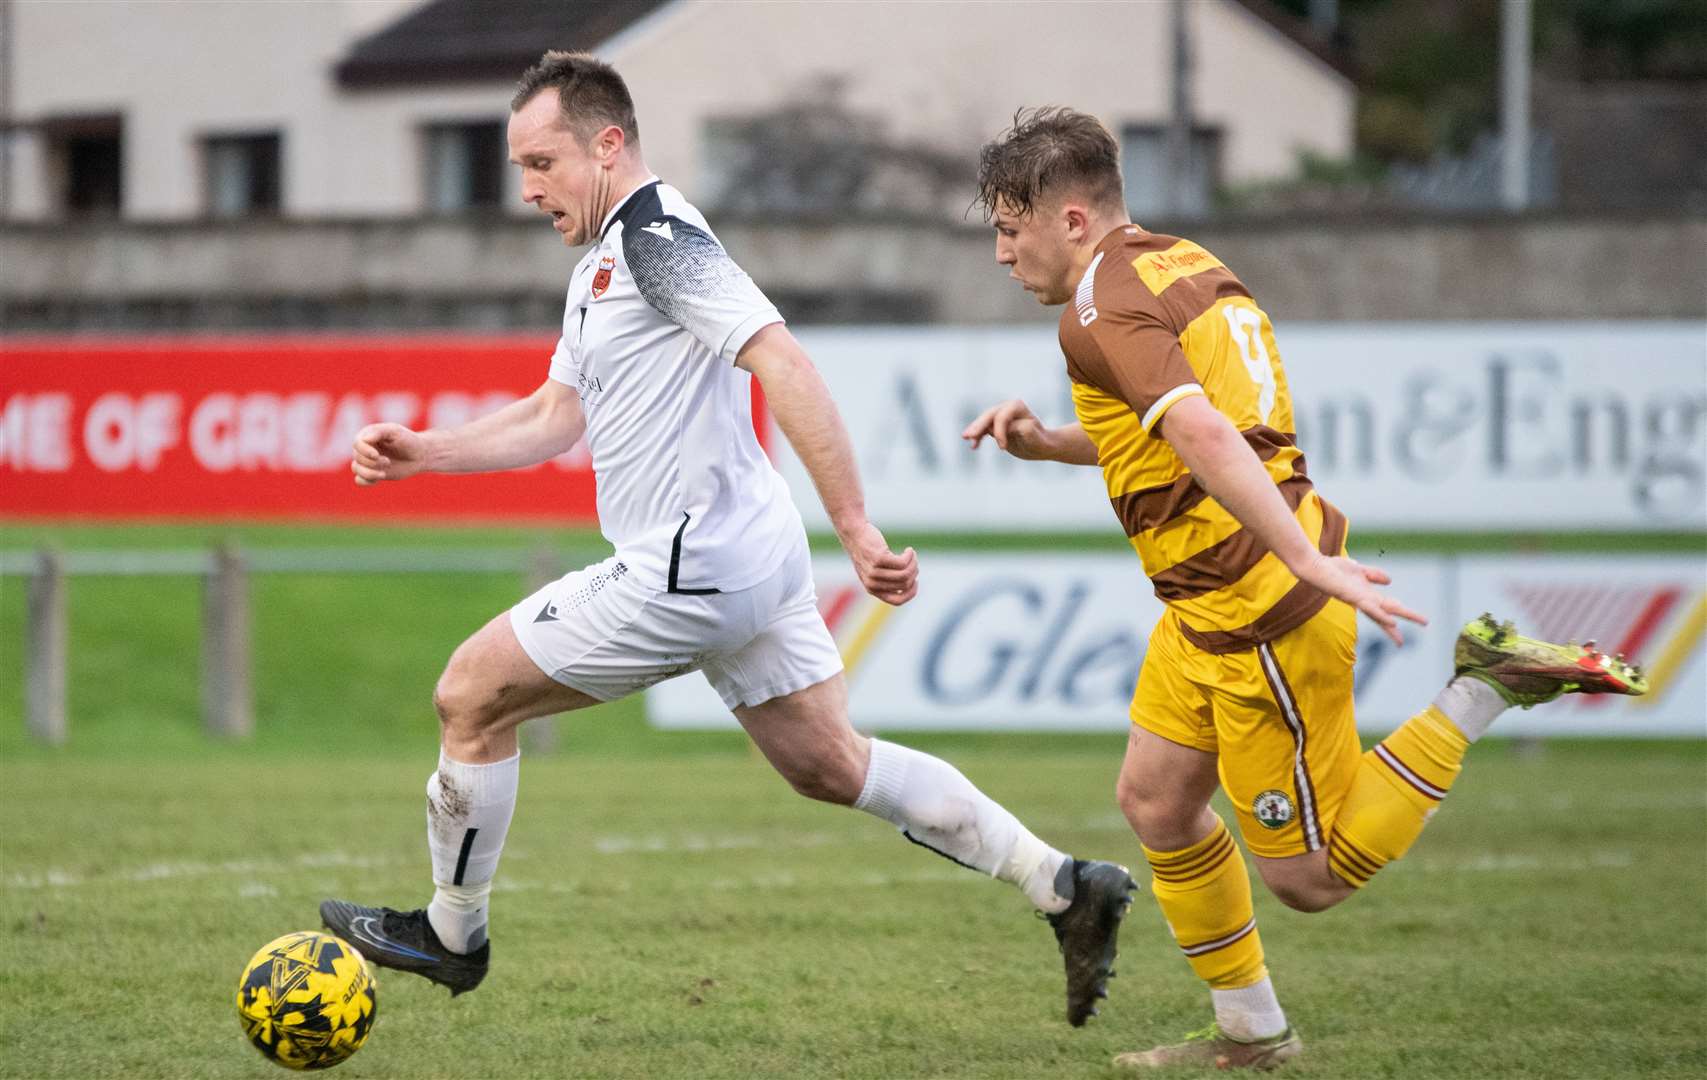 Rothes centre back Charlie MacDonald battles with Forres' Shaun Morrison. ..Forres Mechanics FC (0) vs Rothes FC (1) - Highland Football League 23/24 - Mosset Park, Forres 25/11/2023...Picture: Daniel Forsyth..